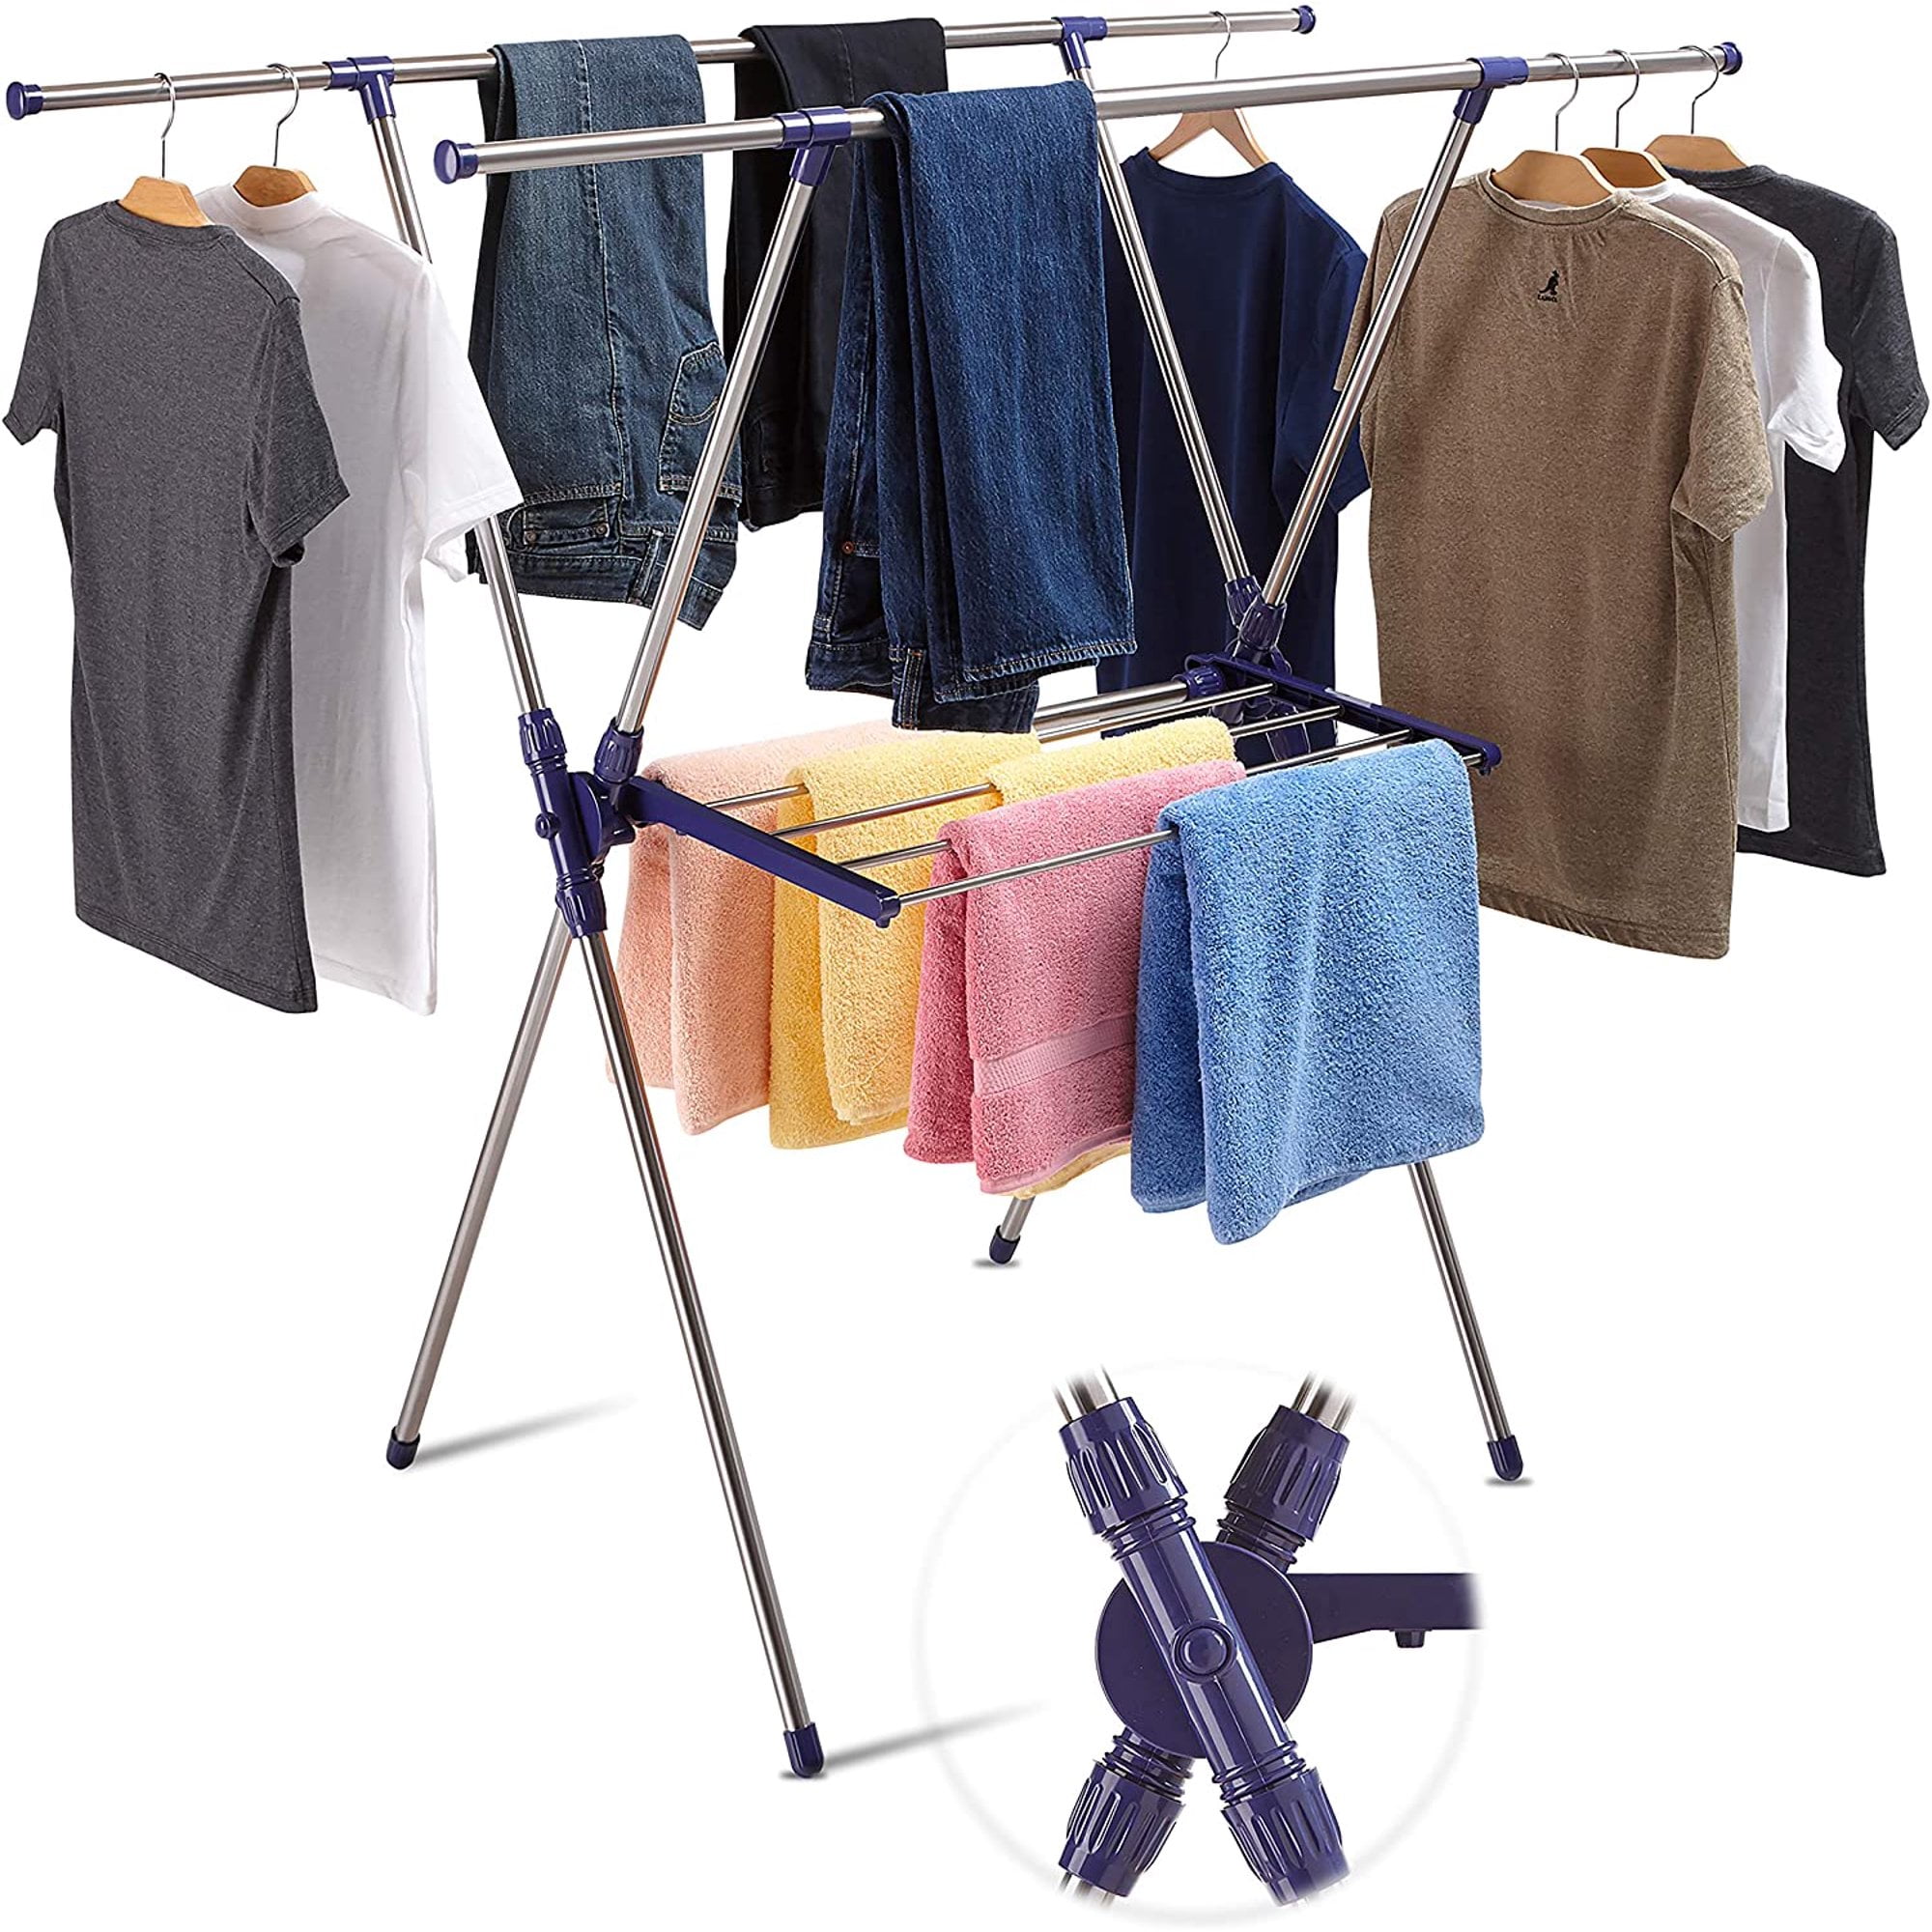 Stainless Steel Underwear Sock Clothes Hanger Laundry Drying Rack Foldable Hot 